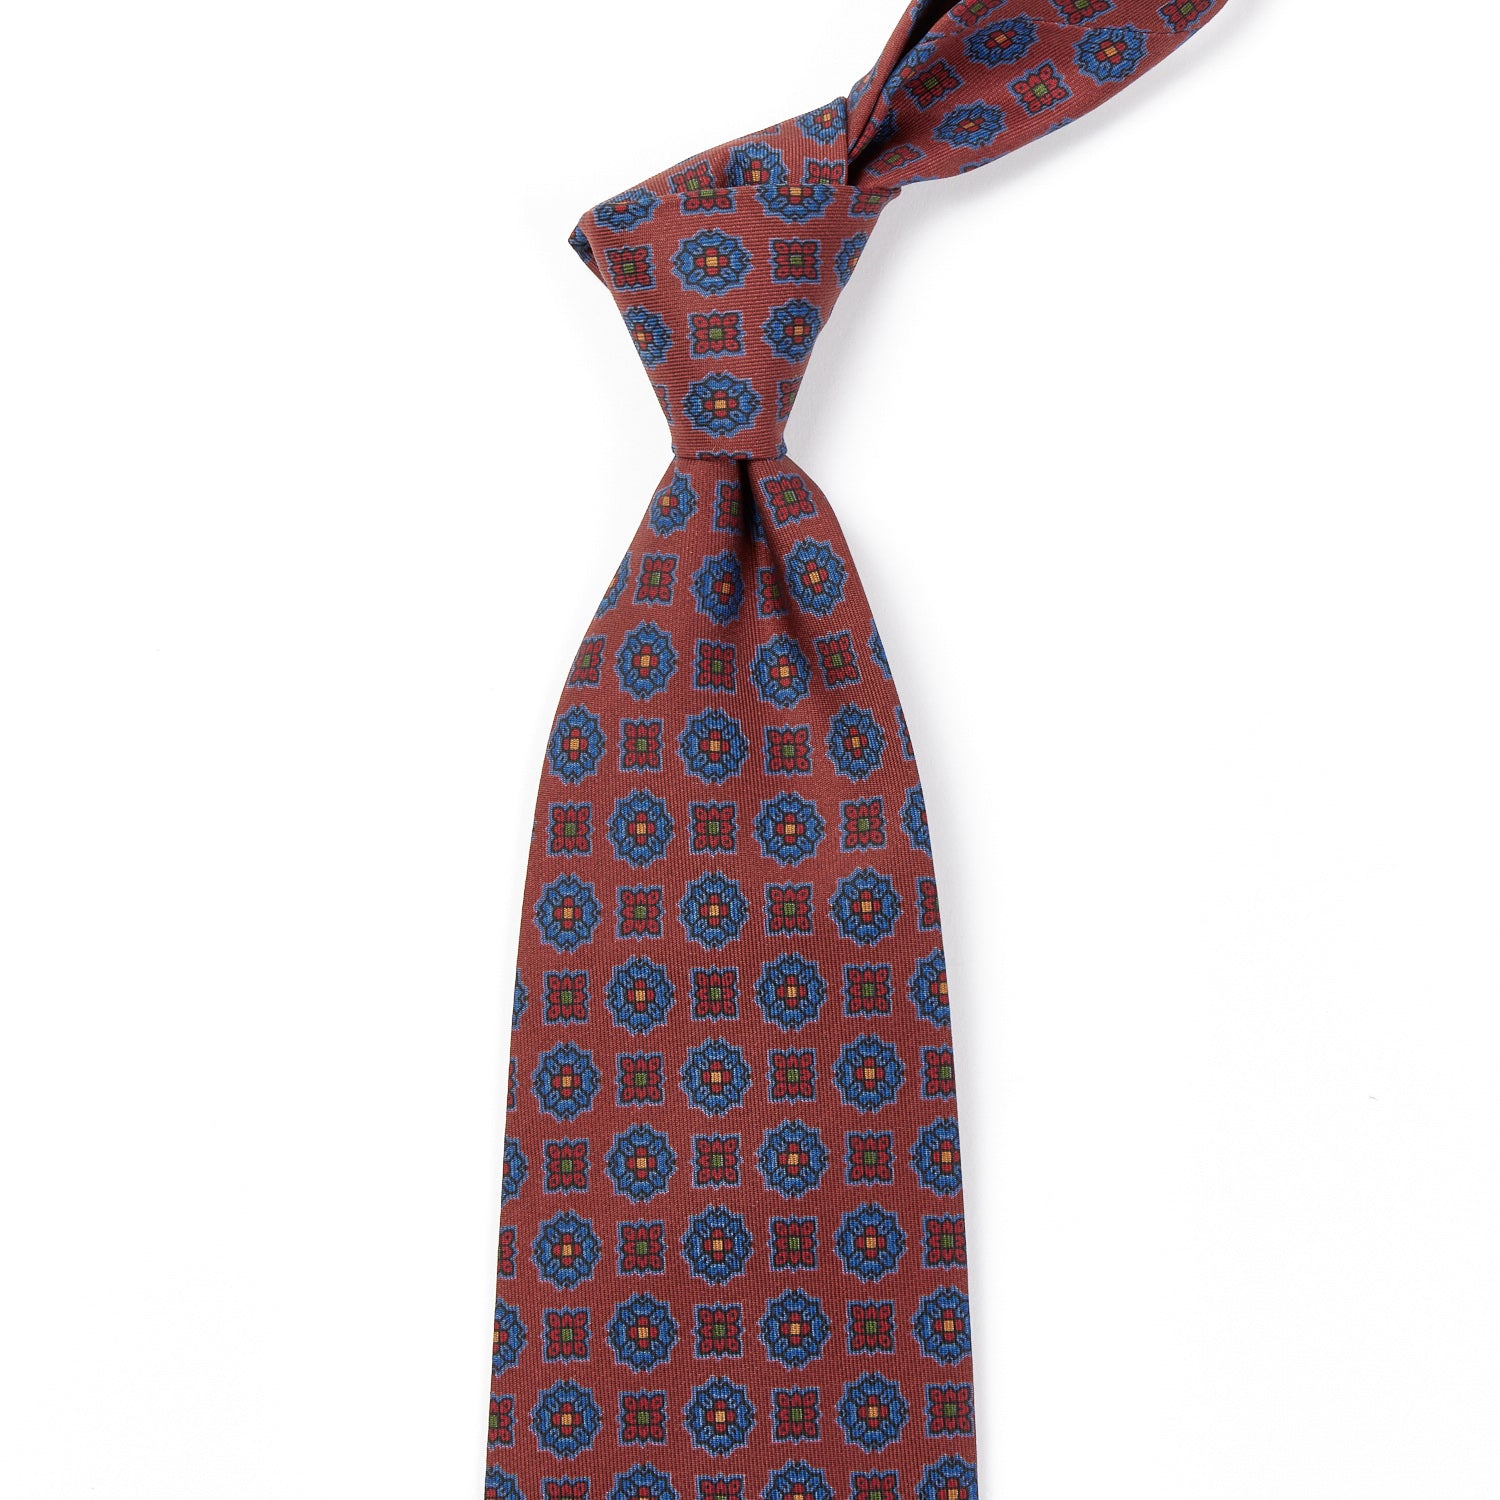 A handmade Sovereign Grade Rust Floral Diamond Ancient Madder tie with blue and red designs from KirbyAllison.com ties.